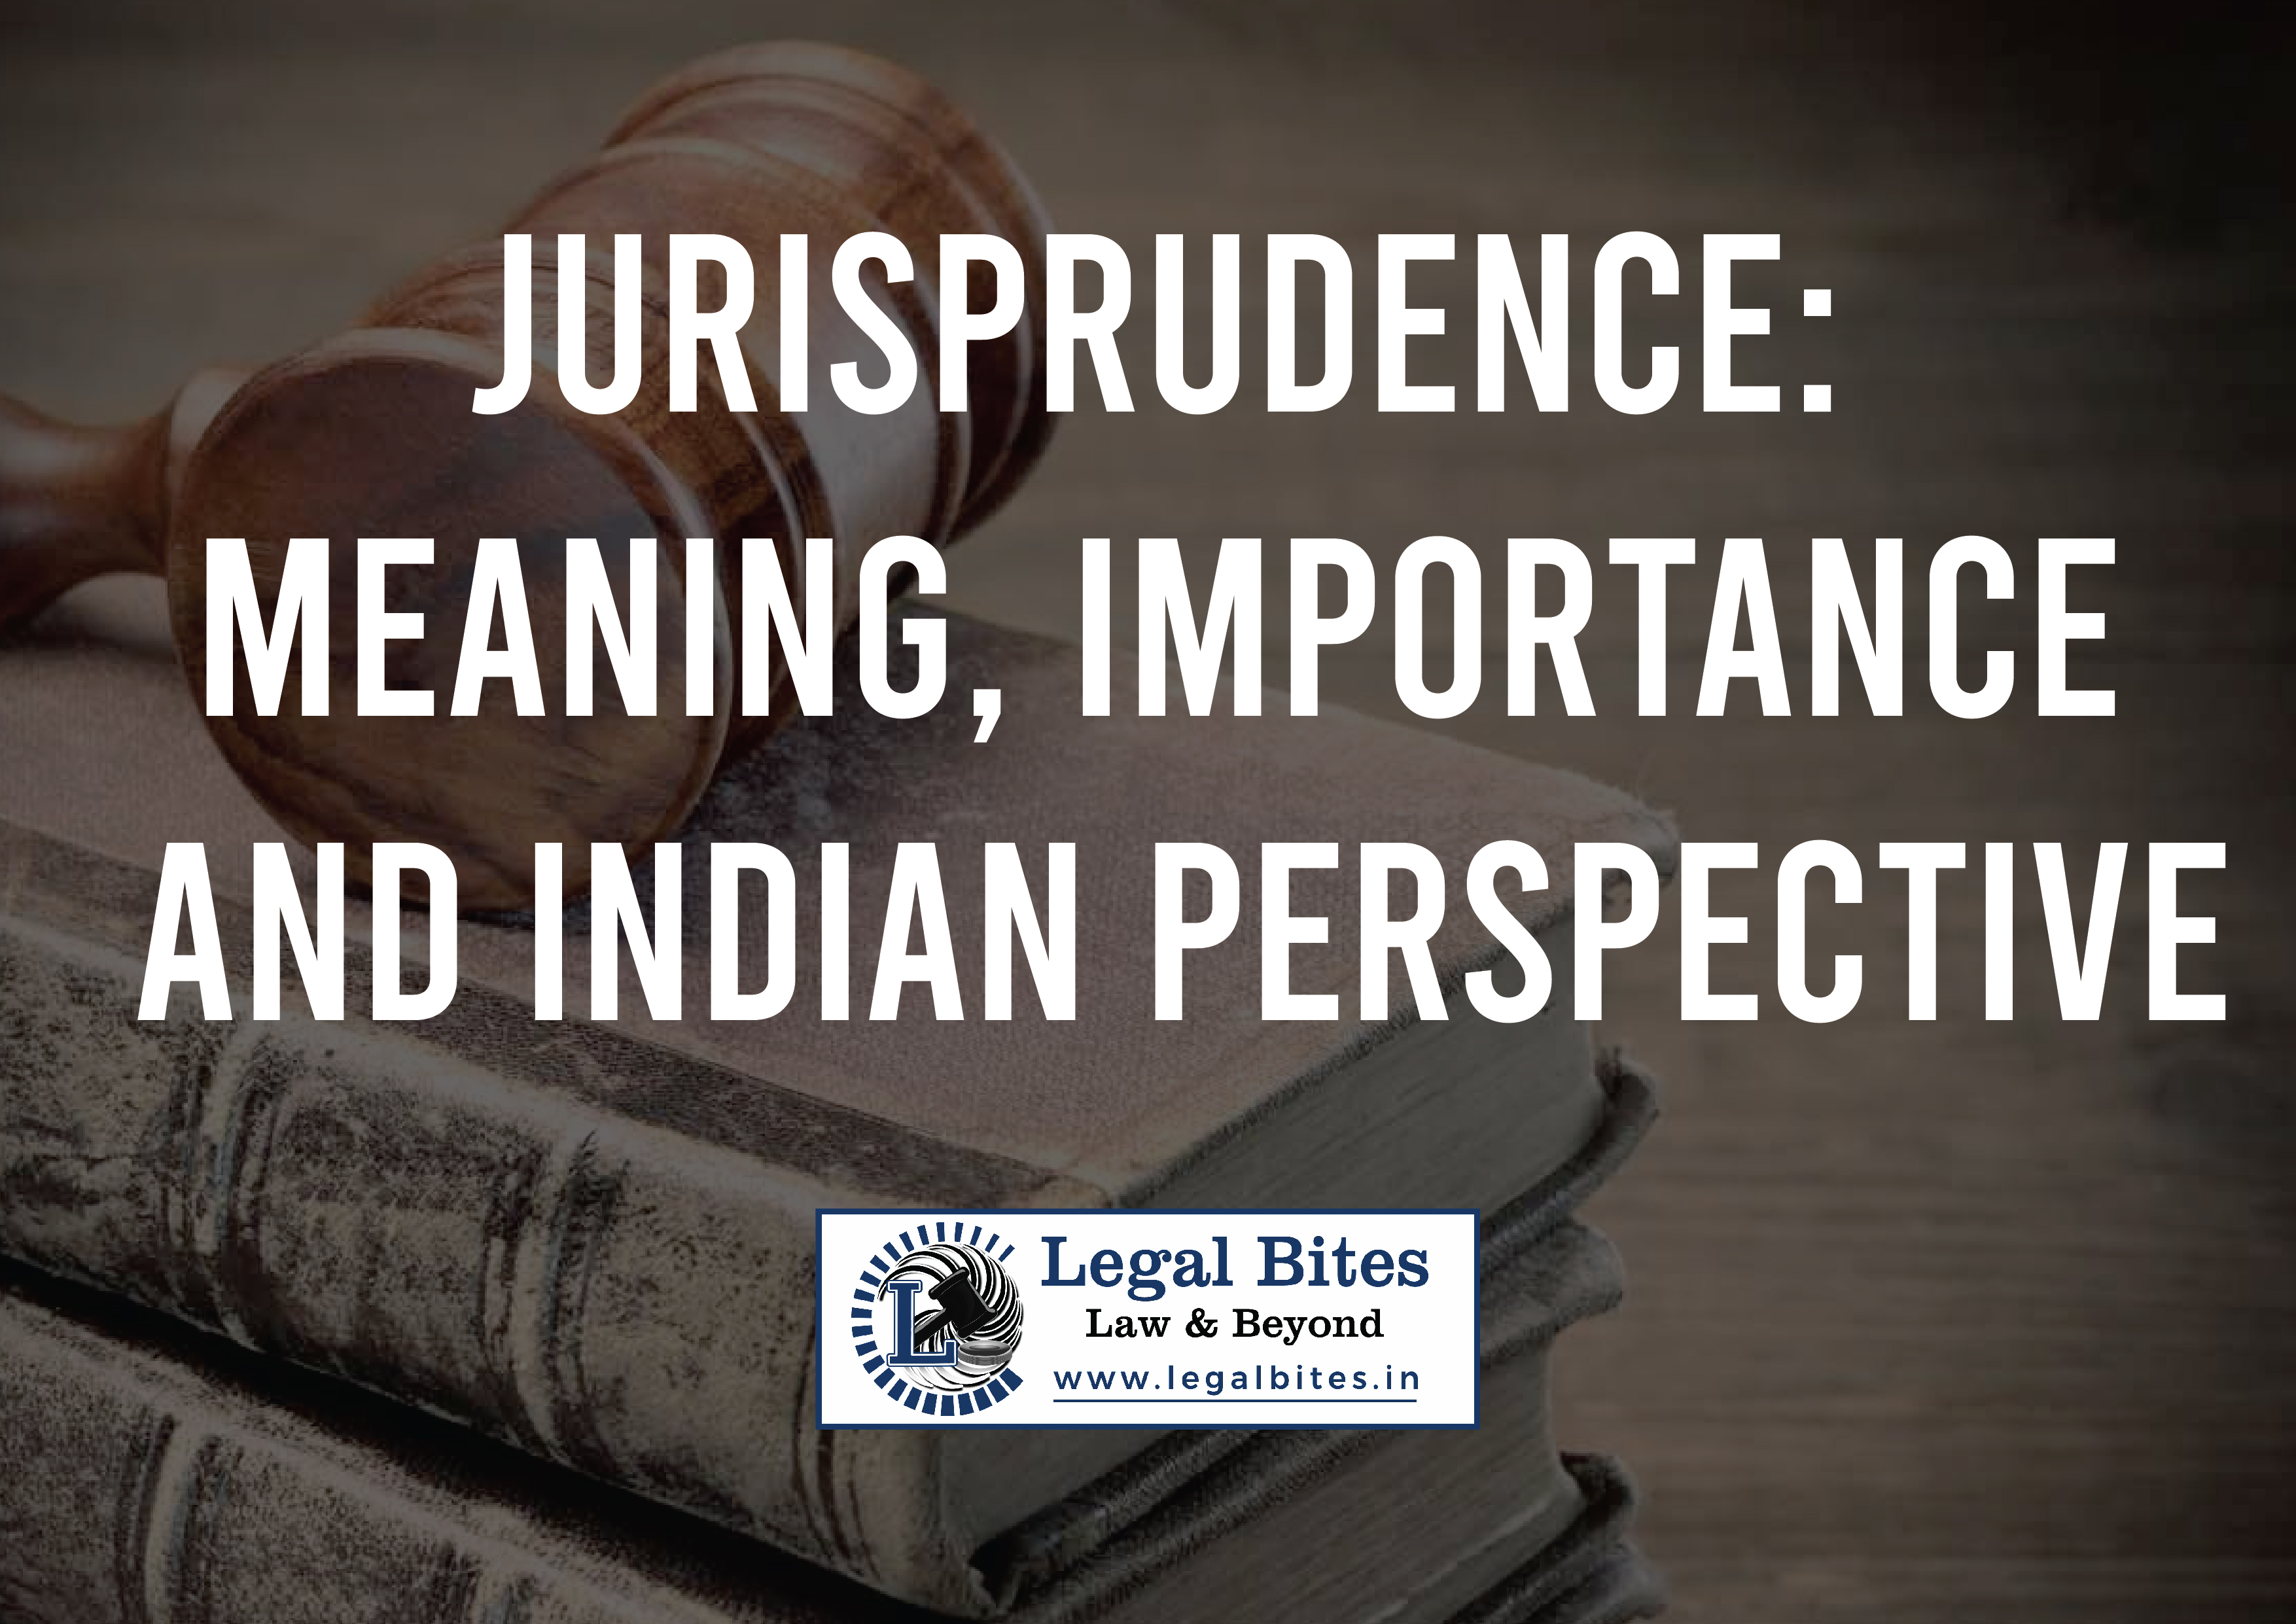 Jurisprudence: Meaning, Importance and Indian Perspective